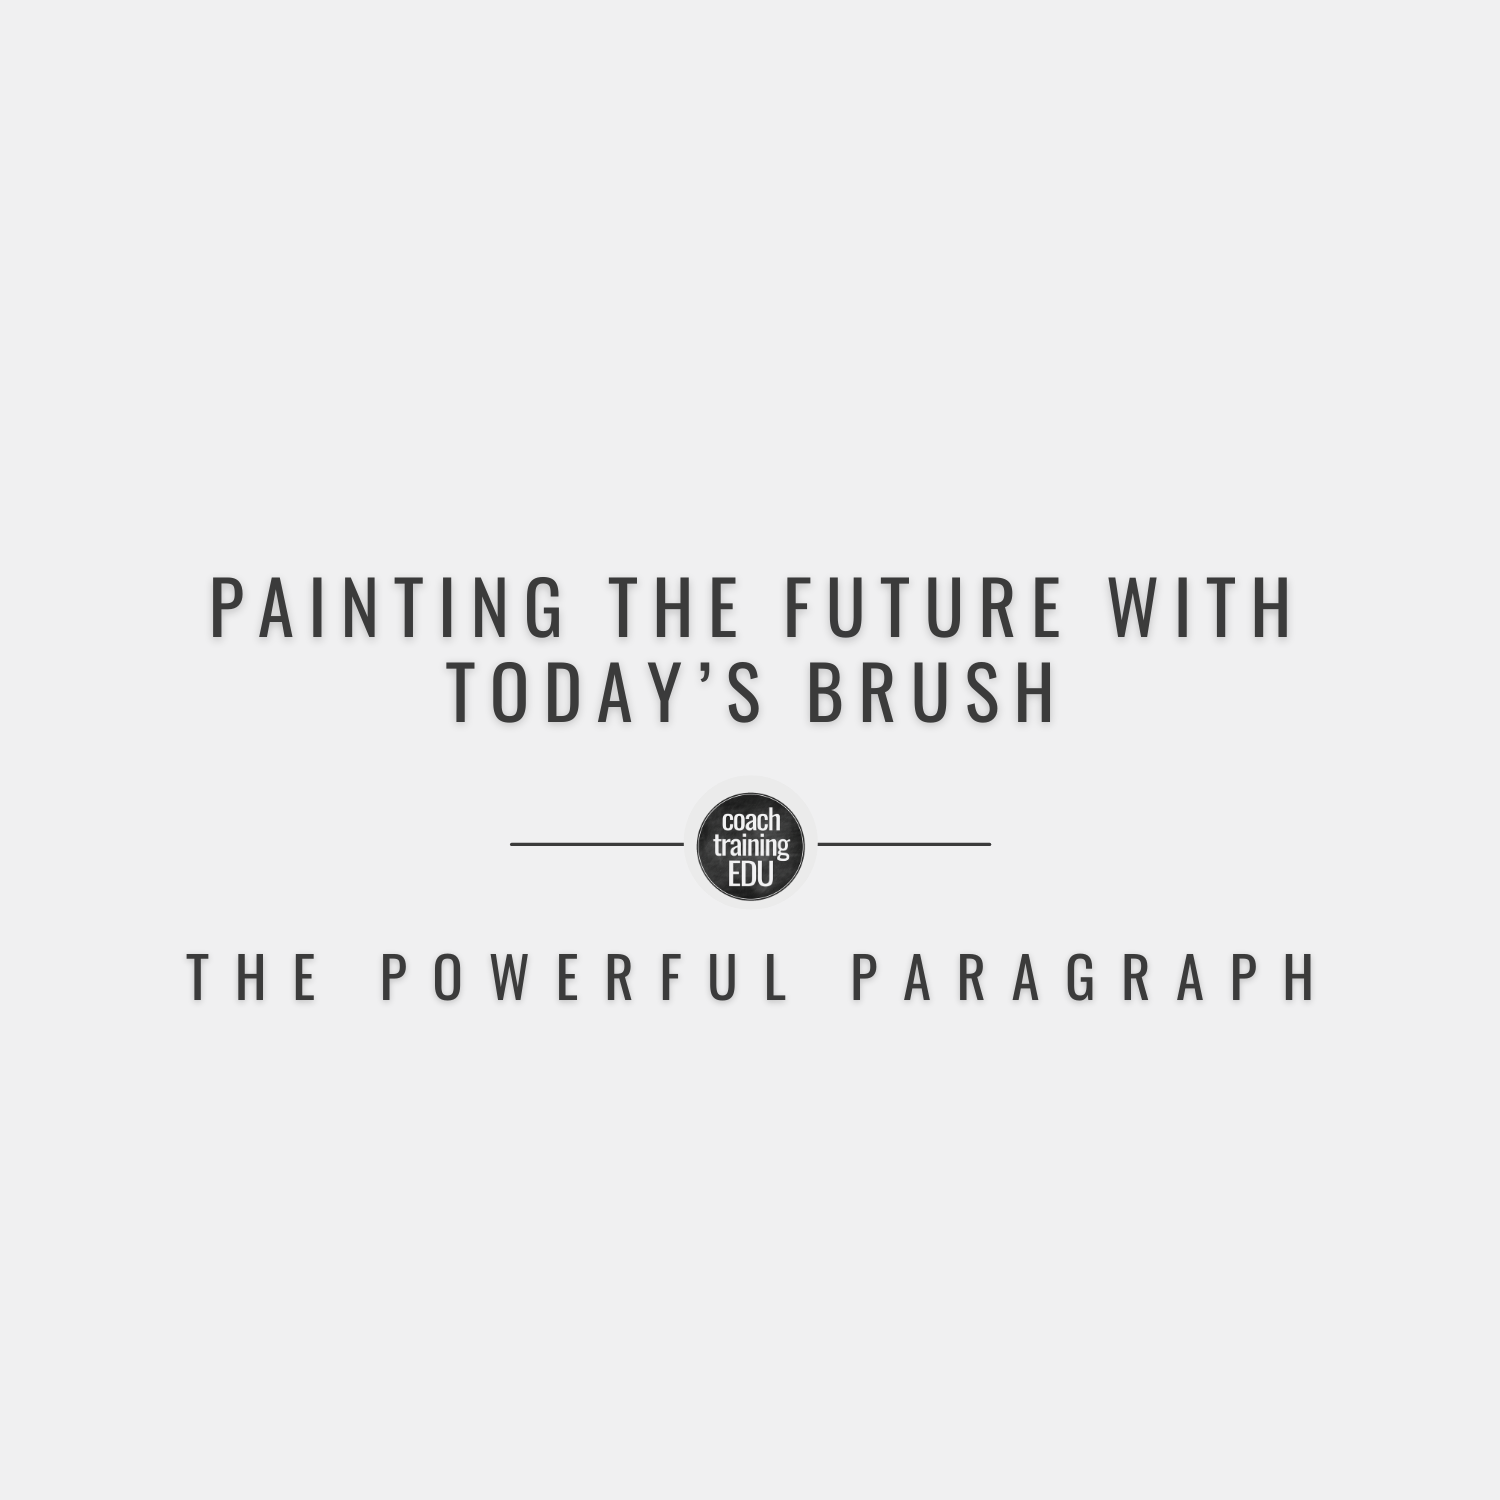 Painting the Future with Today’s Brush